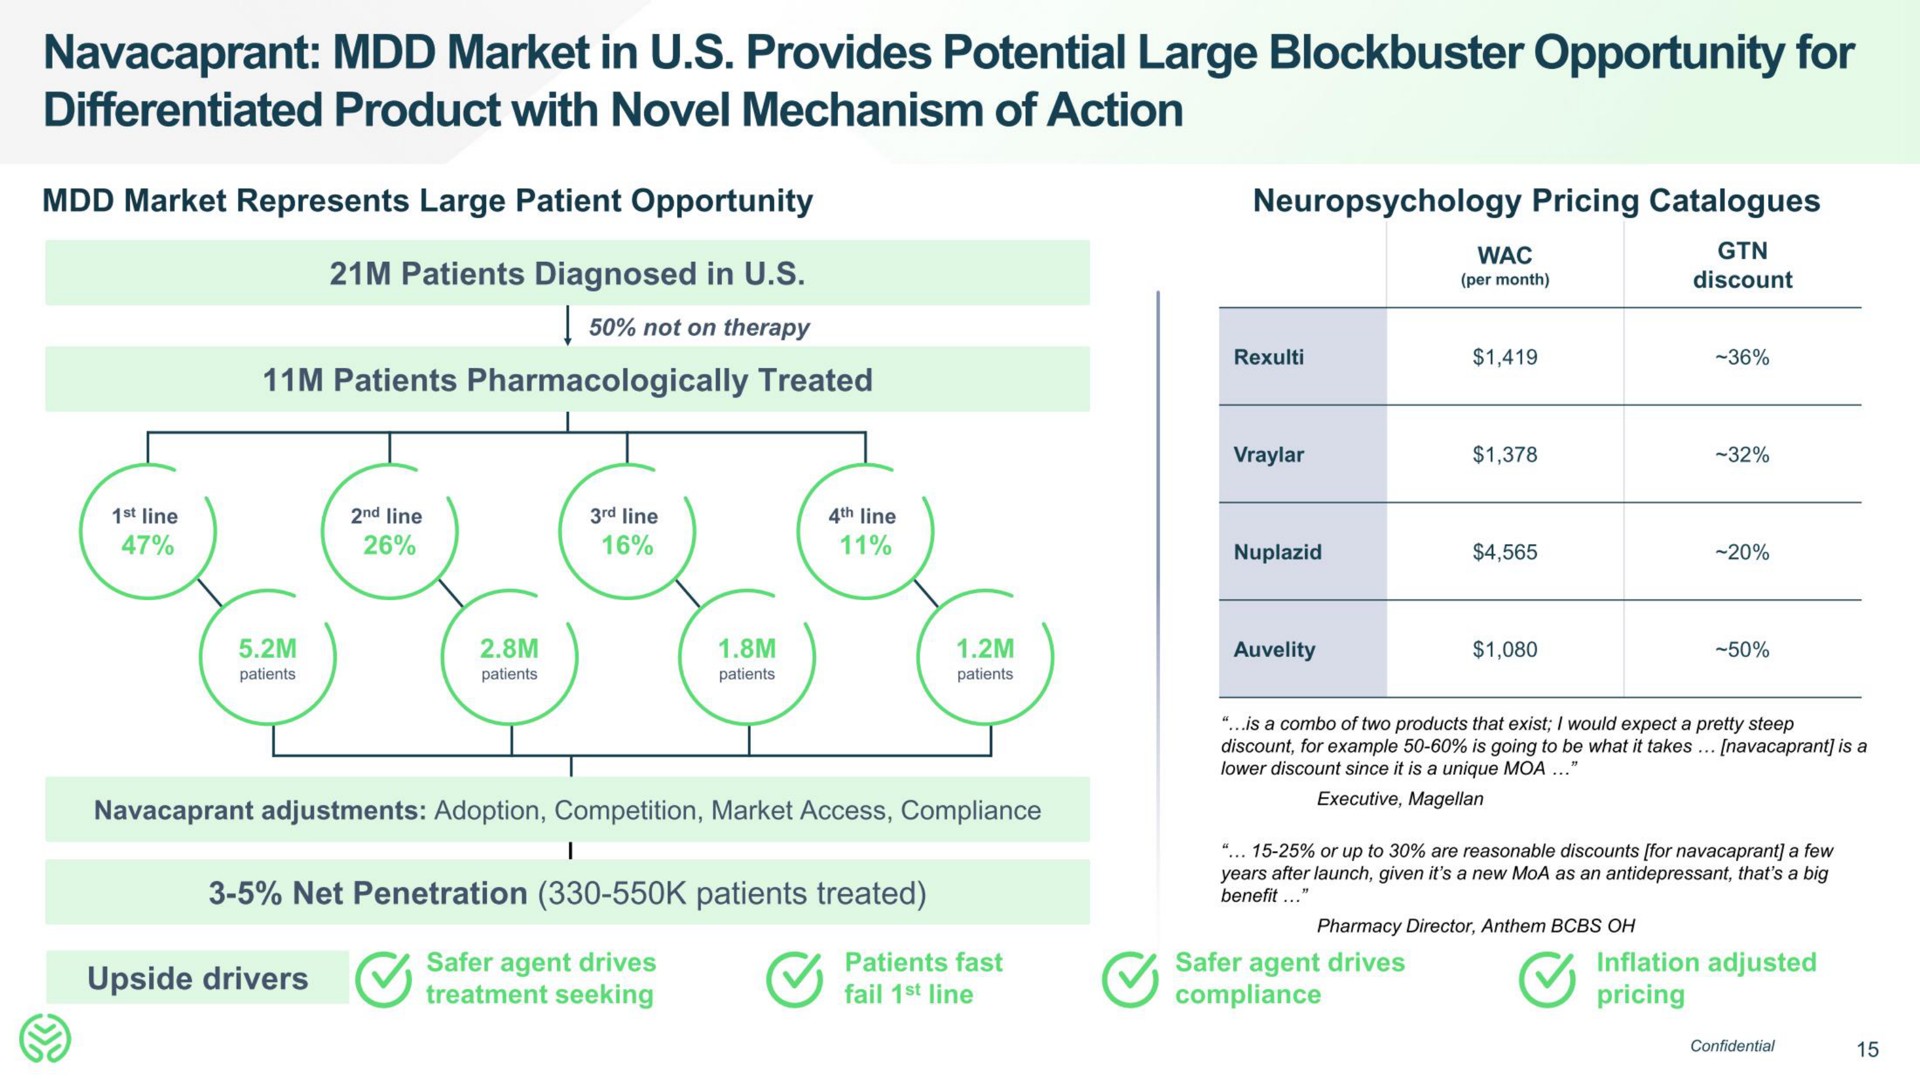 market in provides potential large blockbuster opportunity for differentiated product with novel mechanism of action upside drivers agent drives | Neumora Therapeutics